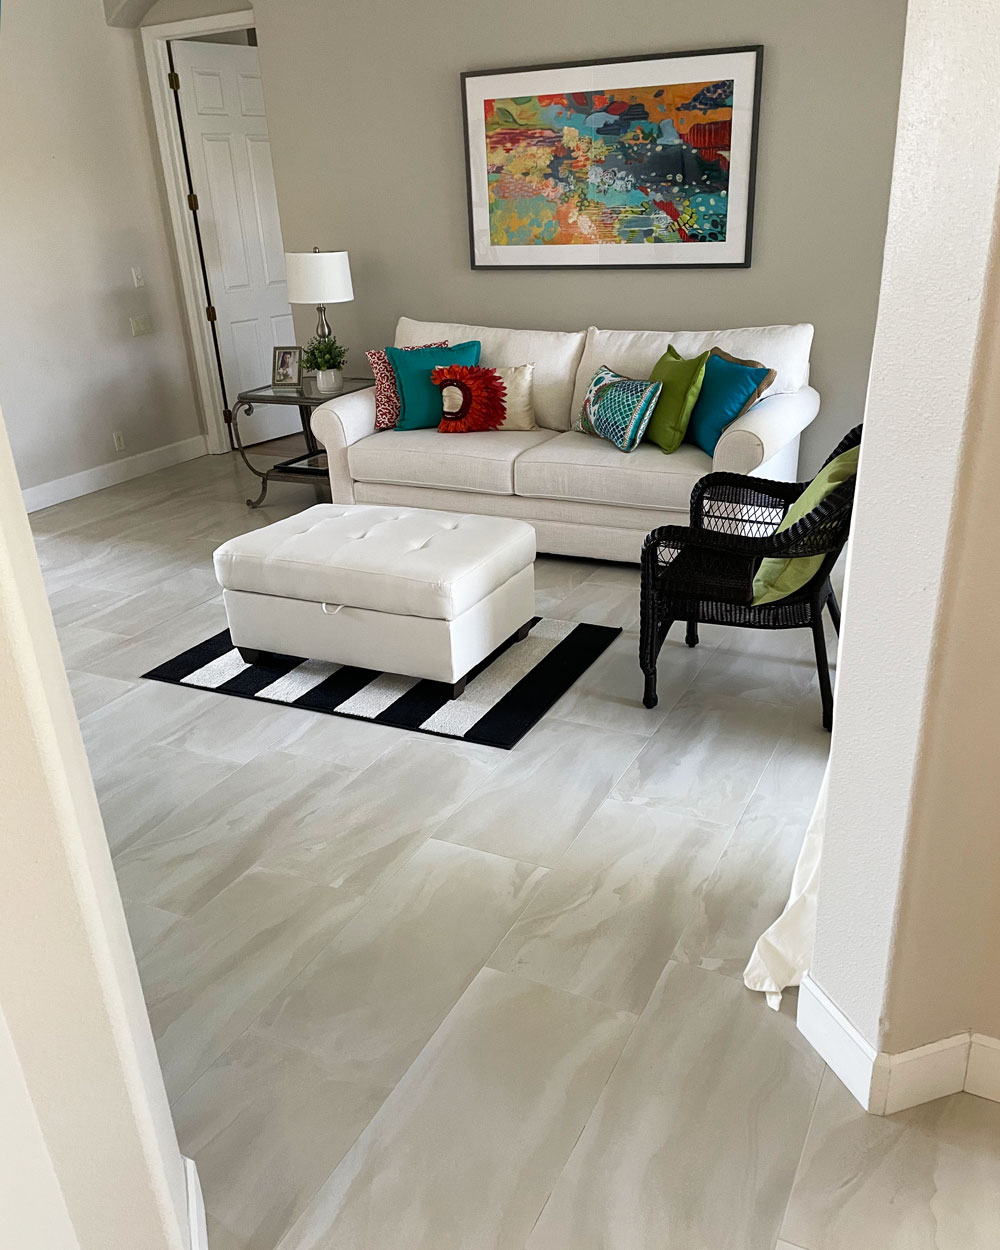 Living room with white and grey tile planks